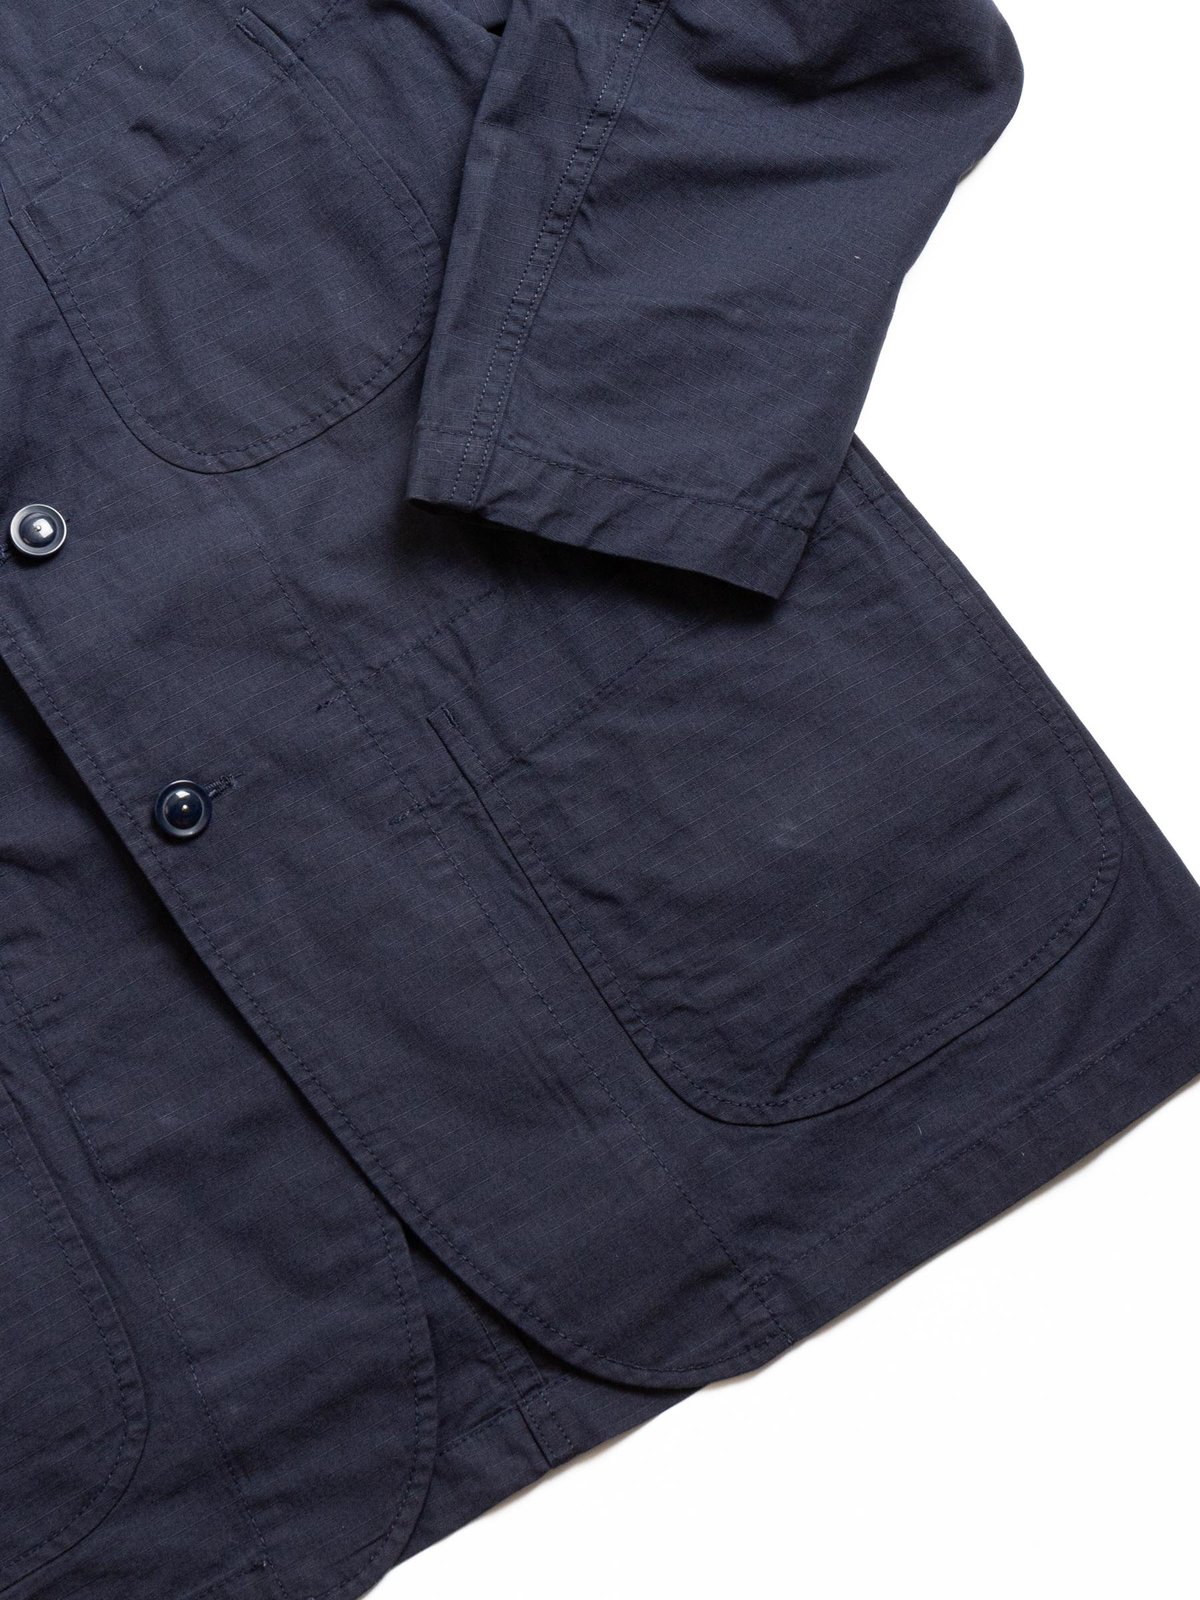 BEDFORD JACKET NAVY COTTON RIPSTOP - Image 3